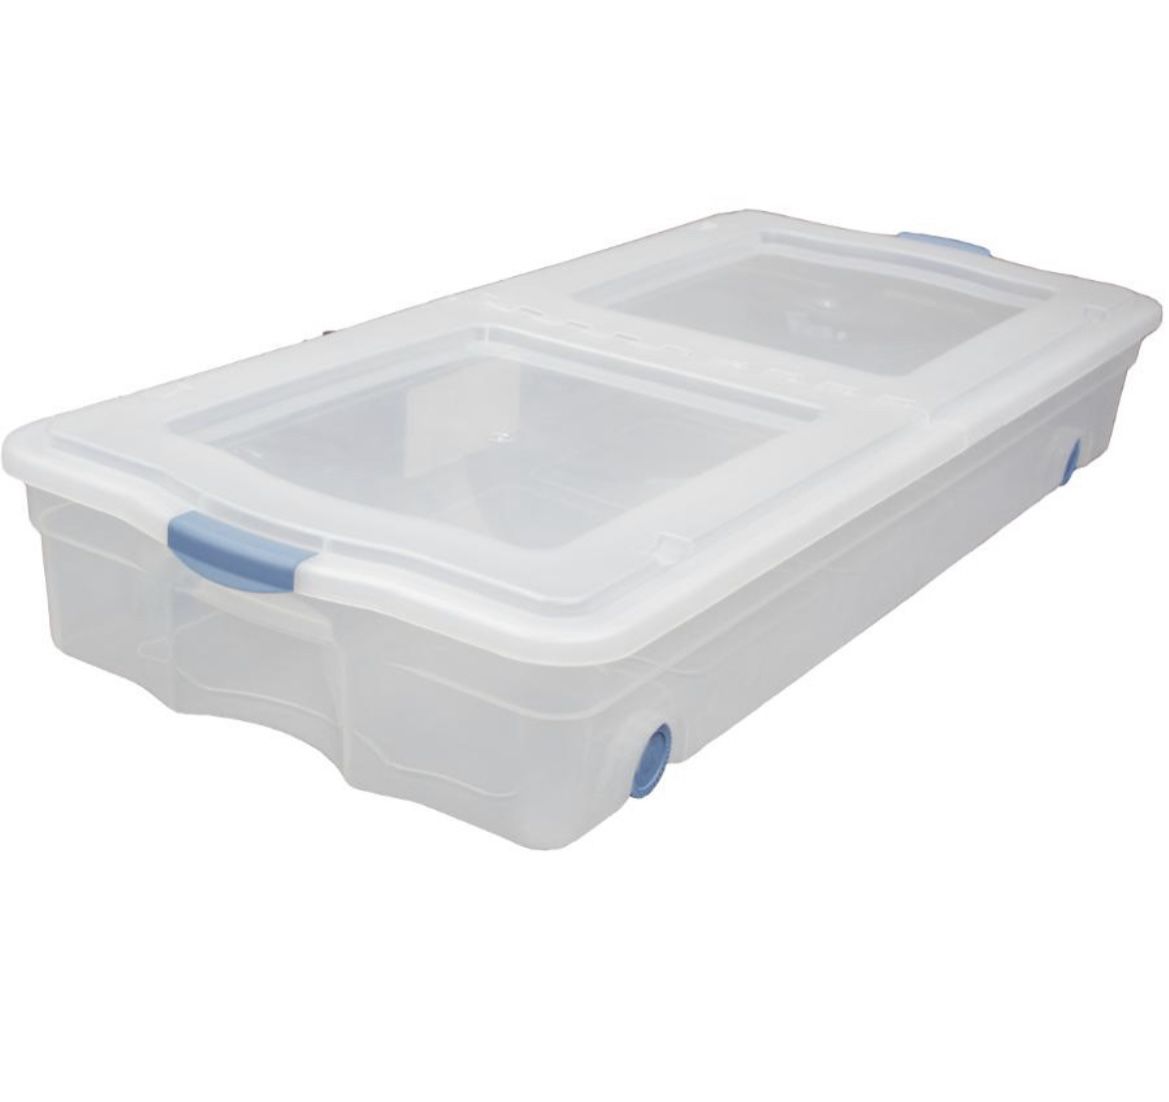 Under bed Storage Plastic Boxes With Cover & Wheels Set Of 2